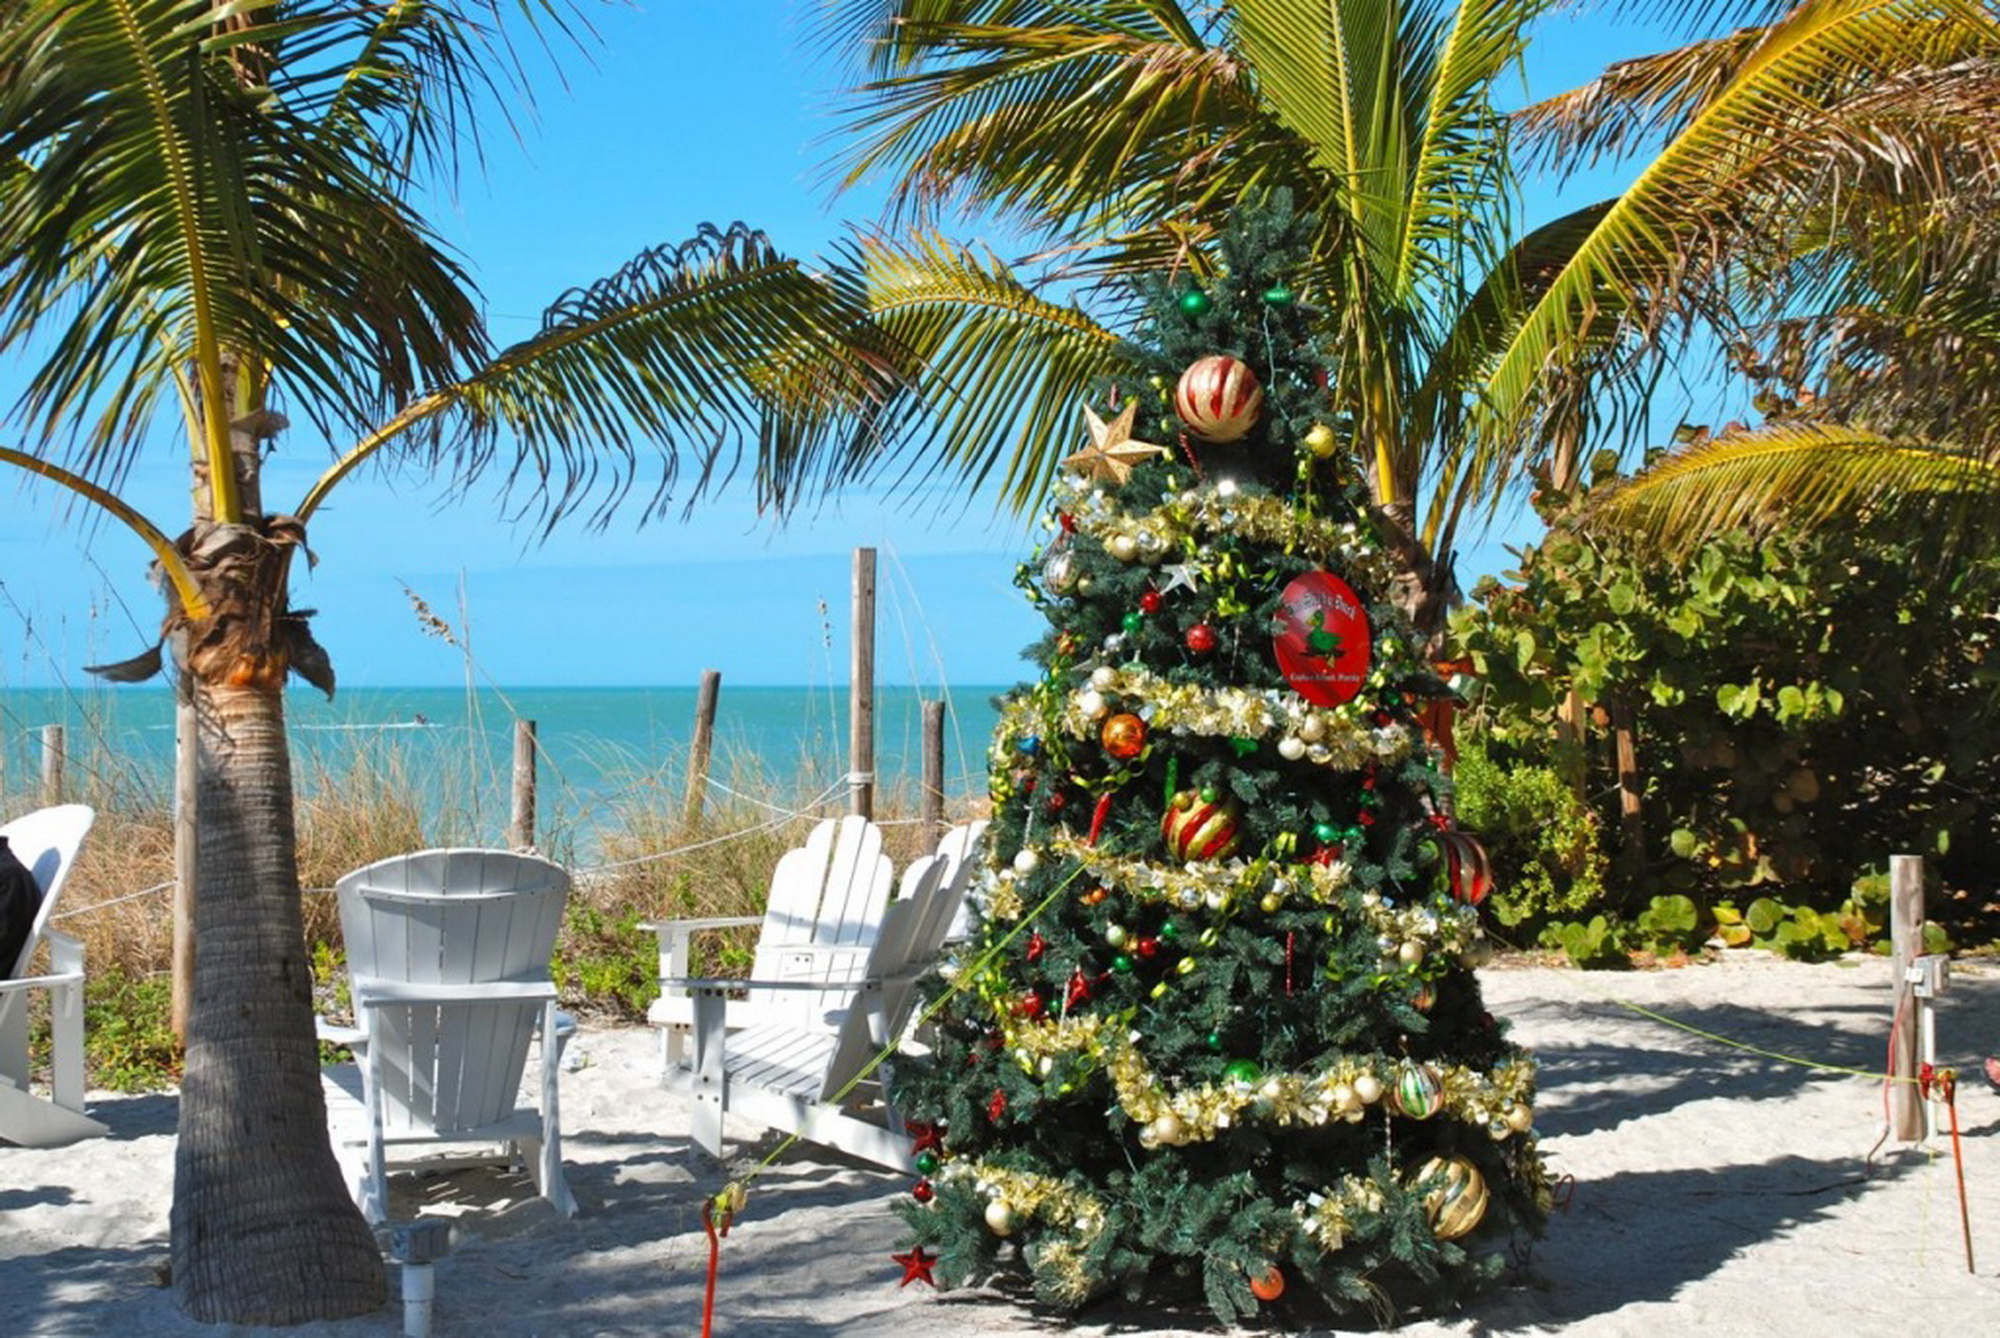 South Florida Vacation Rental Accommodations During The Holidays 1 Personal Injury Claims South Florida Injury Law Firm